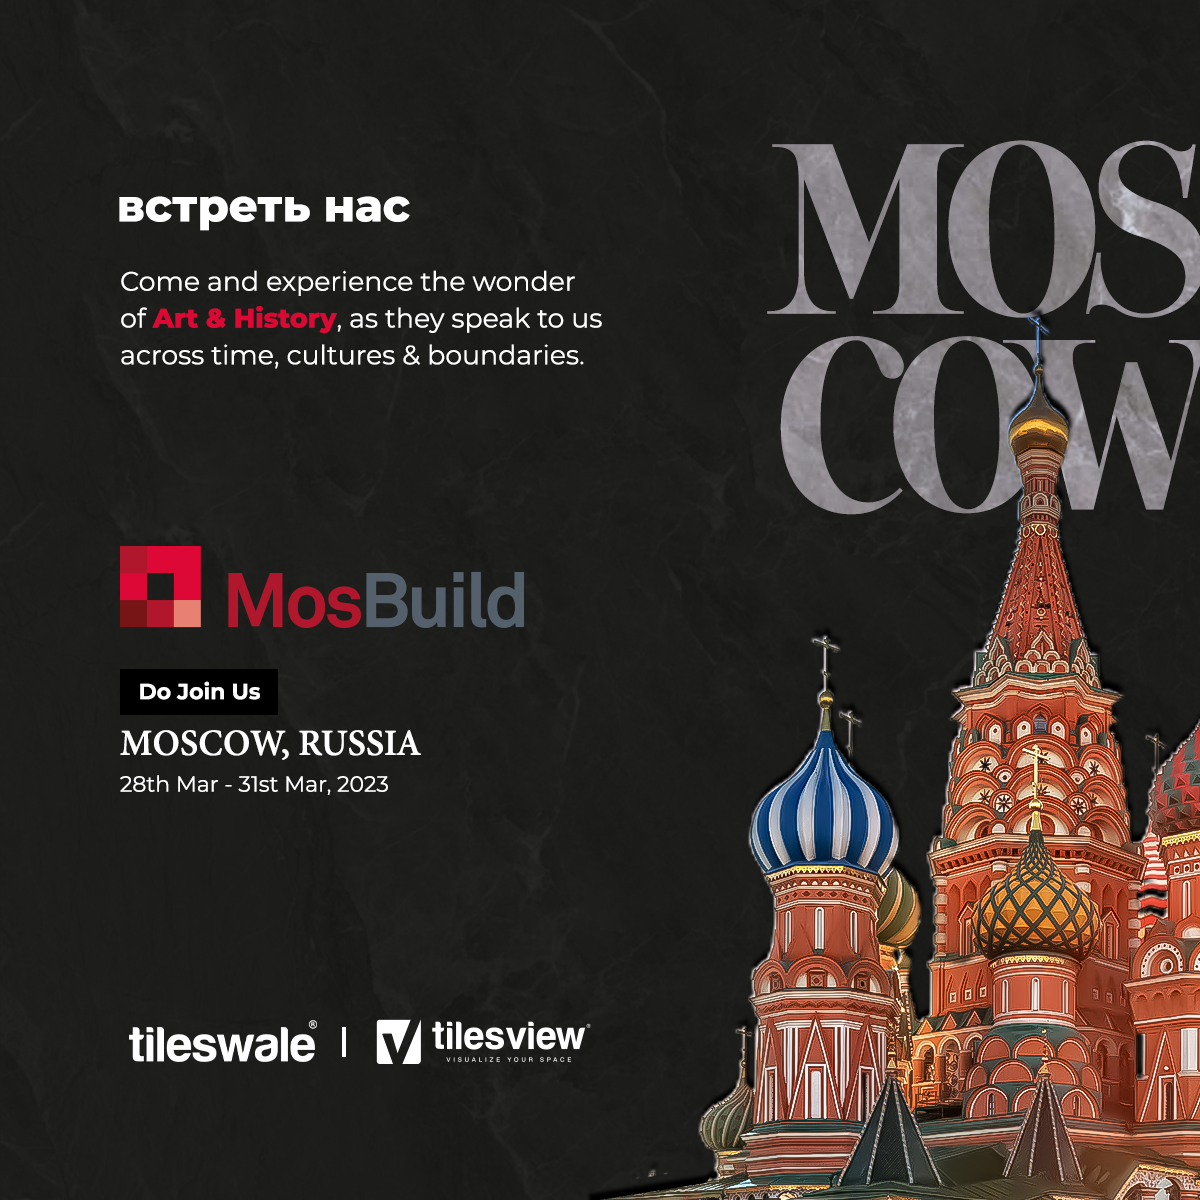 Welcome to Mosbuild 2023!!🤩

Tileswale and Tilesview are bringing together the best minds in the industry to showcase the latest technology. You don't want to miss this!'

#exhibition #moscow #russia #mosbuild #MosBuild2023 #visitus #events #tileswale #tilesview